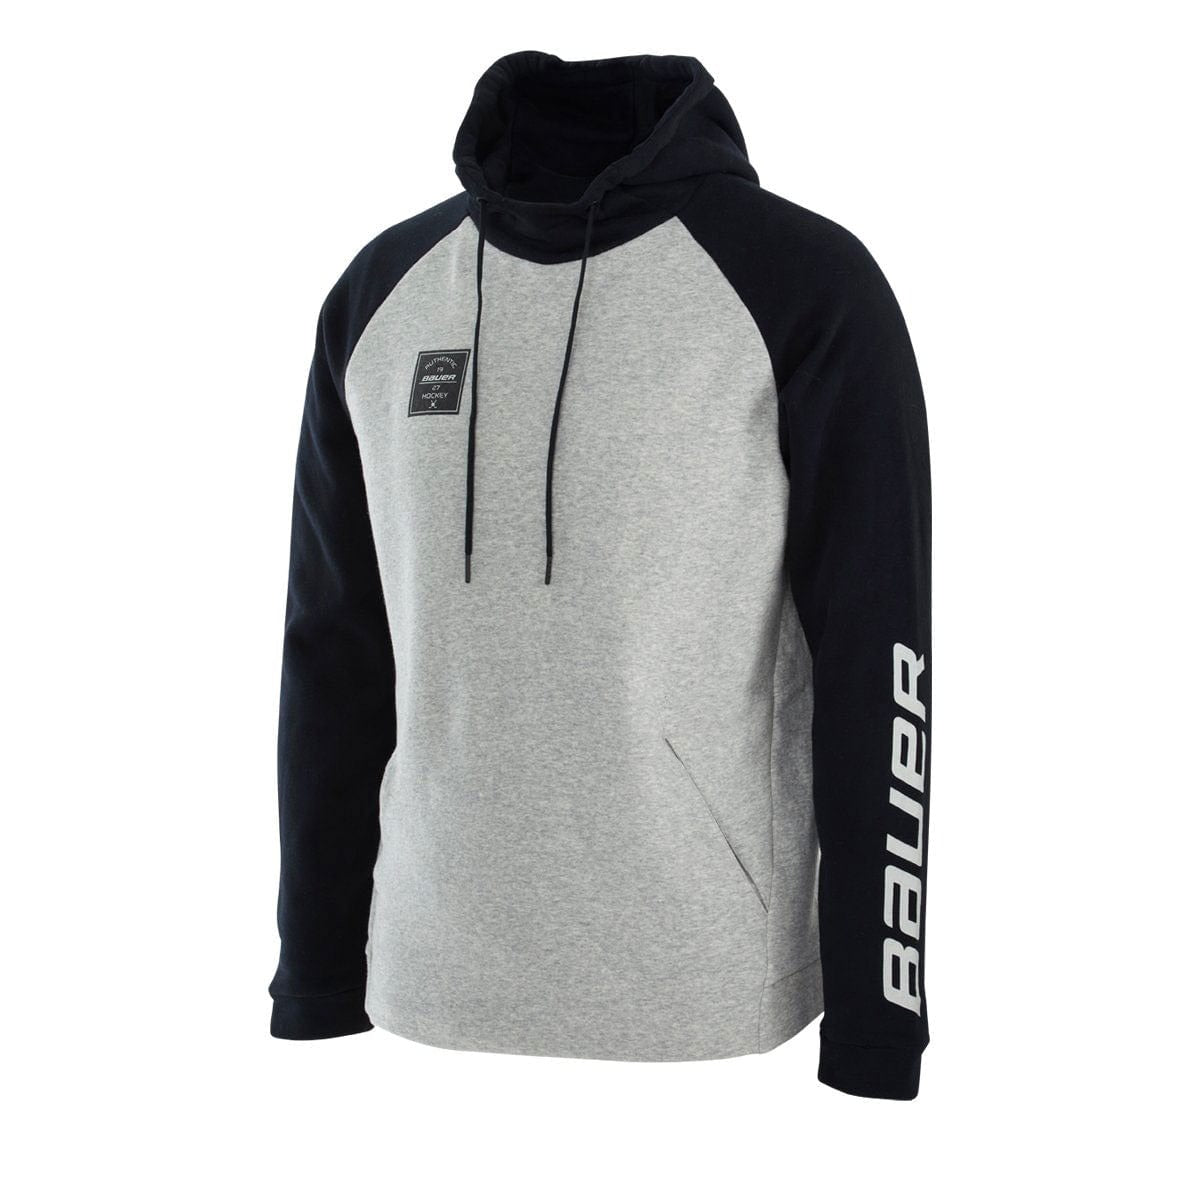 Bauer Square Mens Hoody